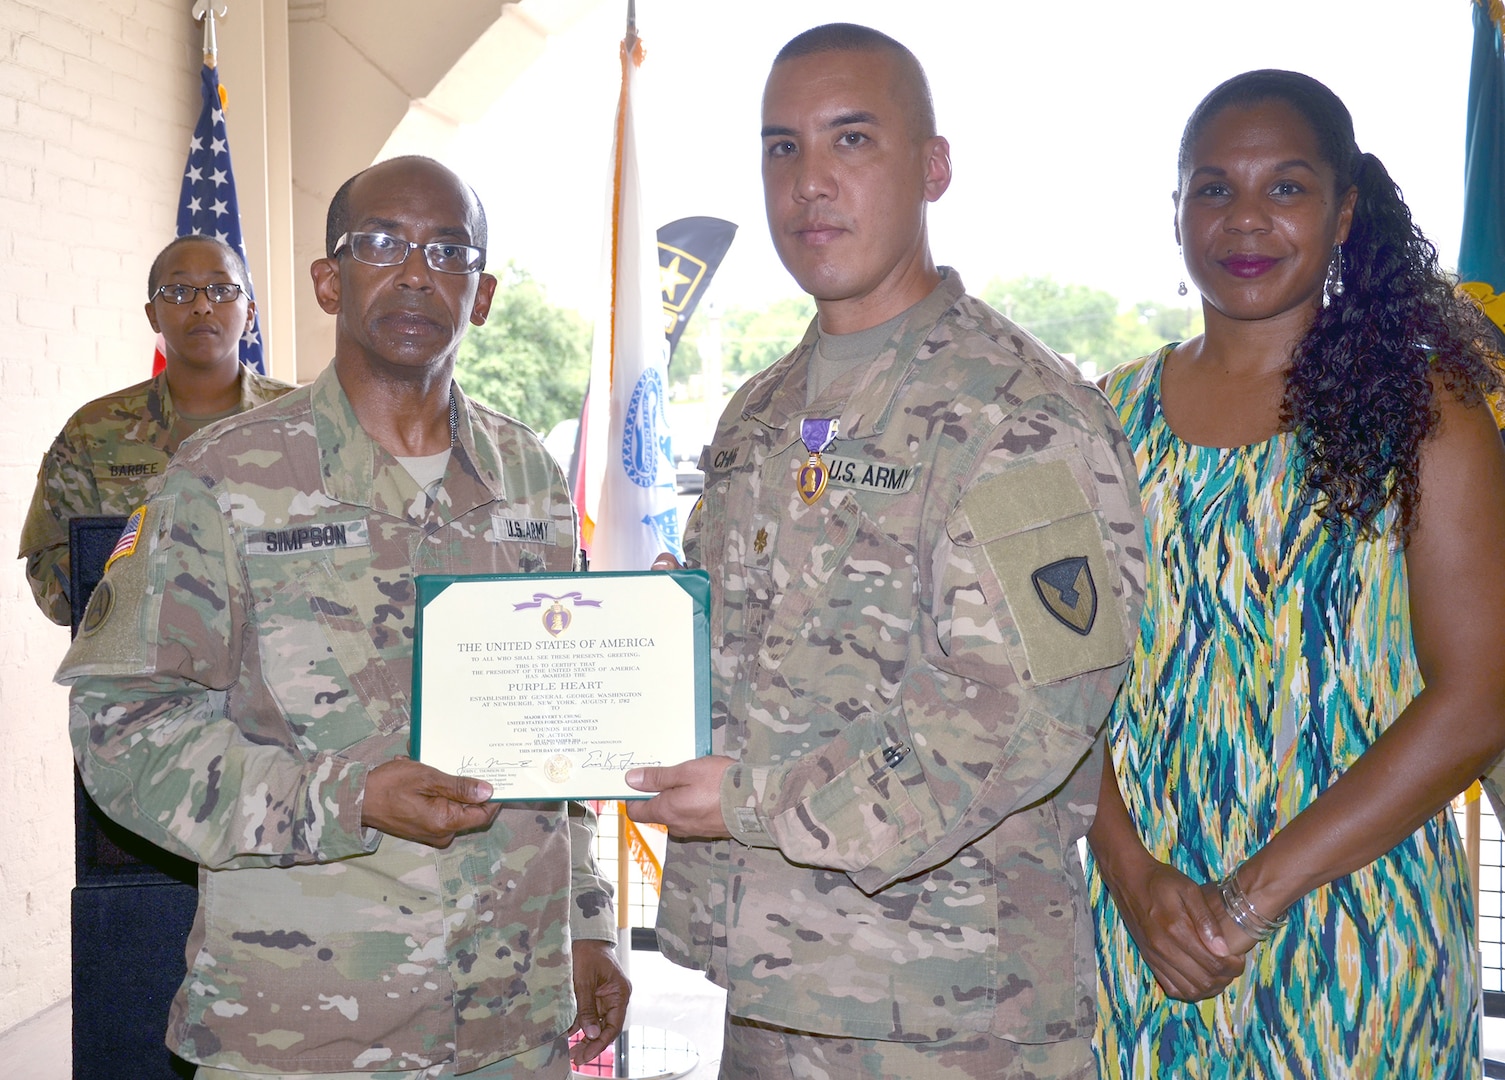 Maj. Gen. James Simpson presents the Purple Heart to Maj. Evan Chung June 9 at Joint Base San Antonio-Fort Sam Houston, Texas. Simpson is the Army Contracting Command commanding general, and Chung is a contracting officer assigned to Field Directorate Office-Fort Sam Houston. Also pictured is Chung’s wife, Nickola.